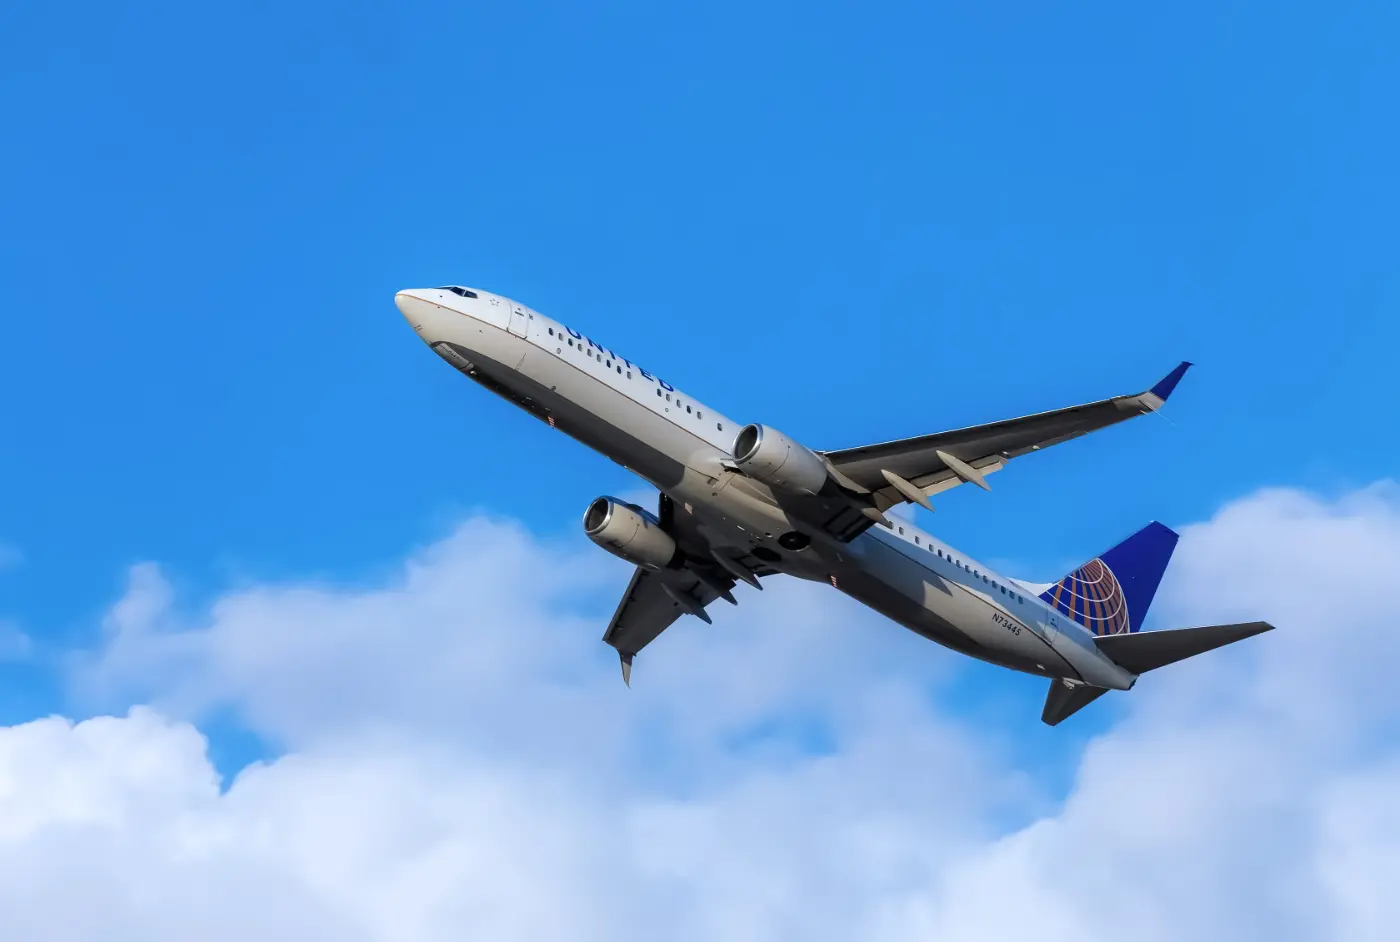 Read more about how fast commercial planes fly.